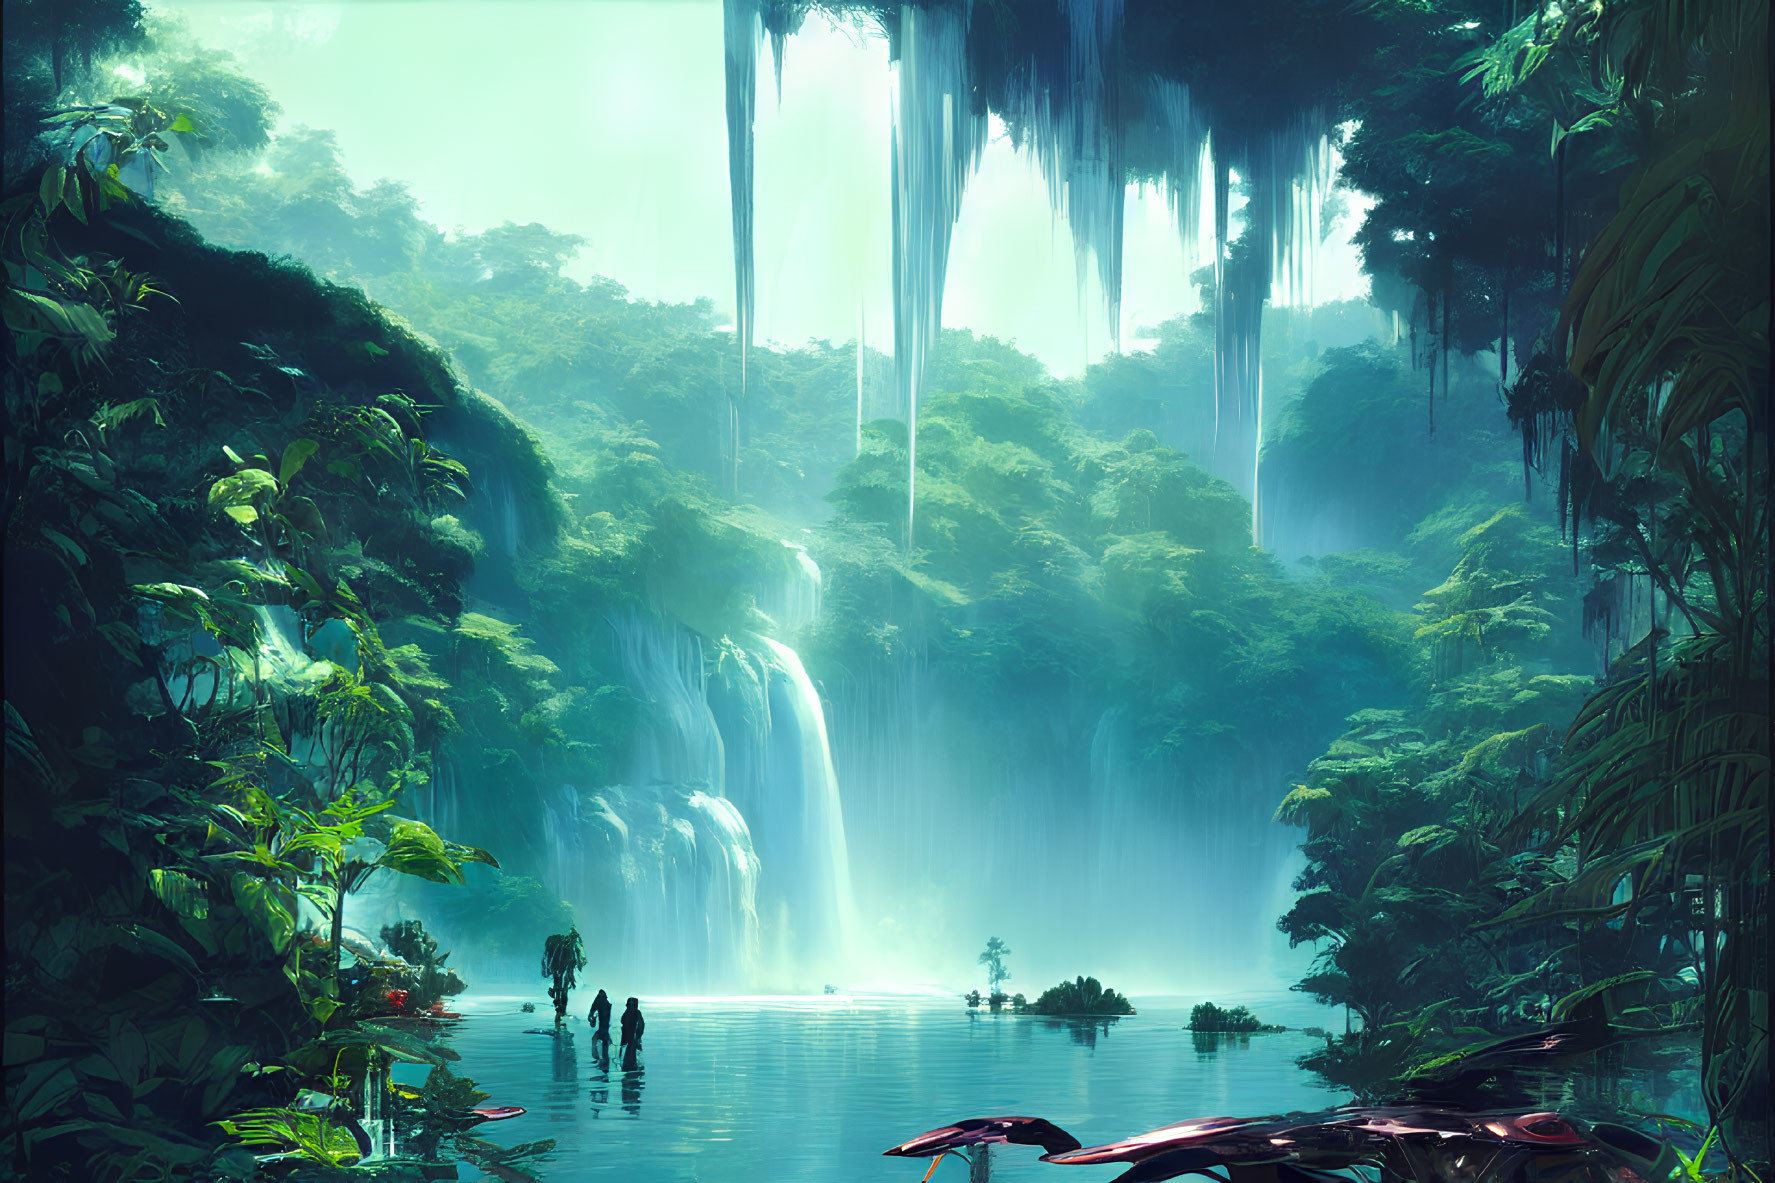 Lush Green Forest with Waterfalls and People Walking in Shallow Water